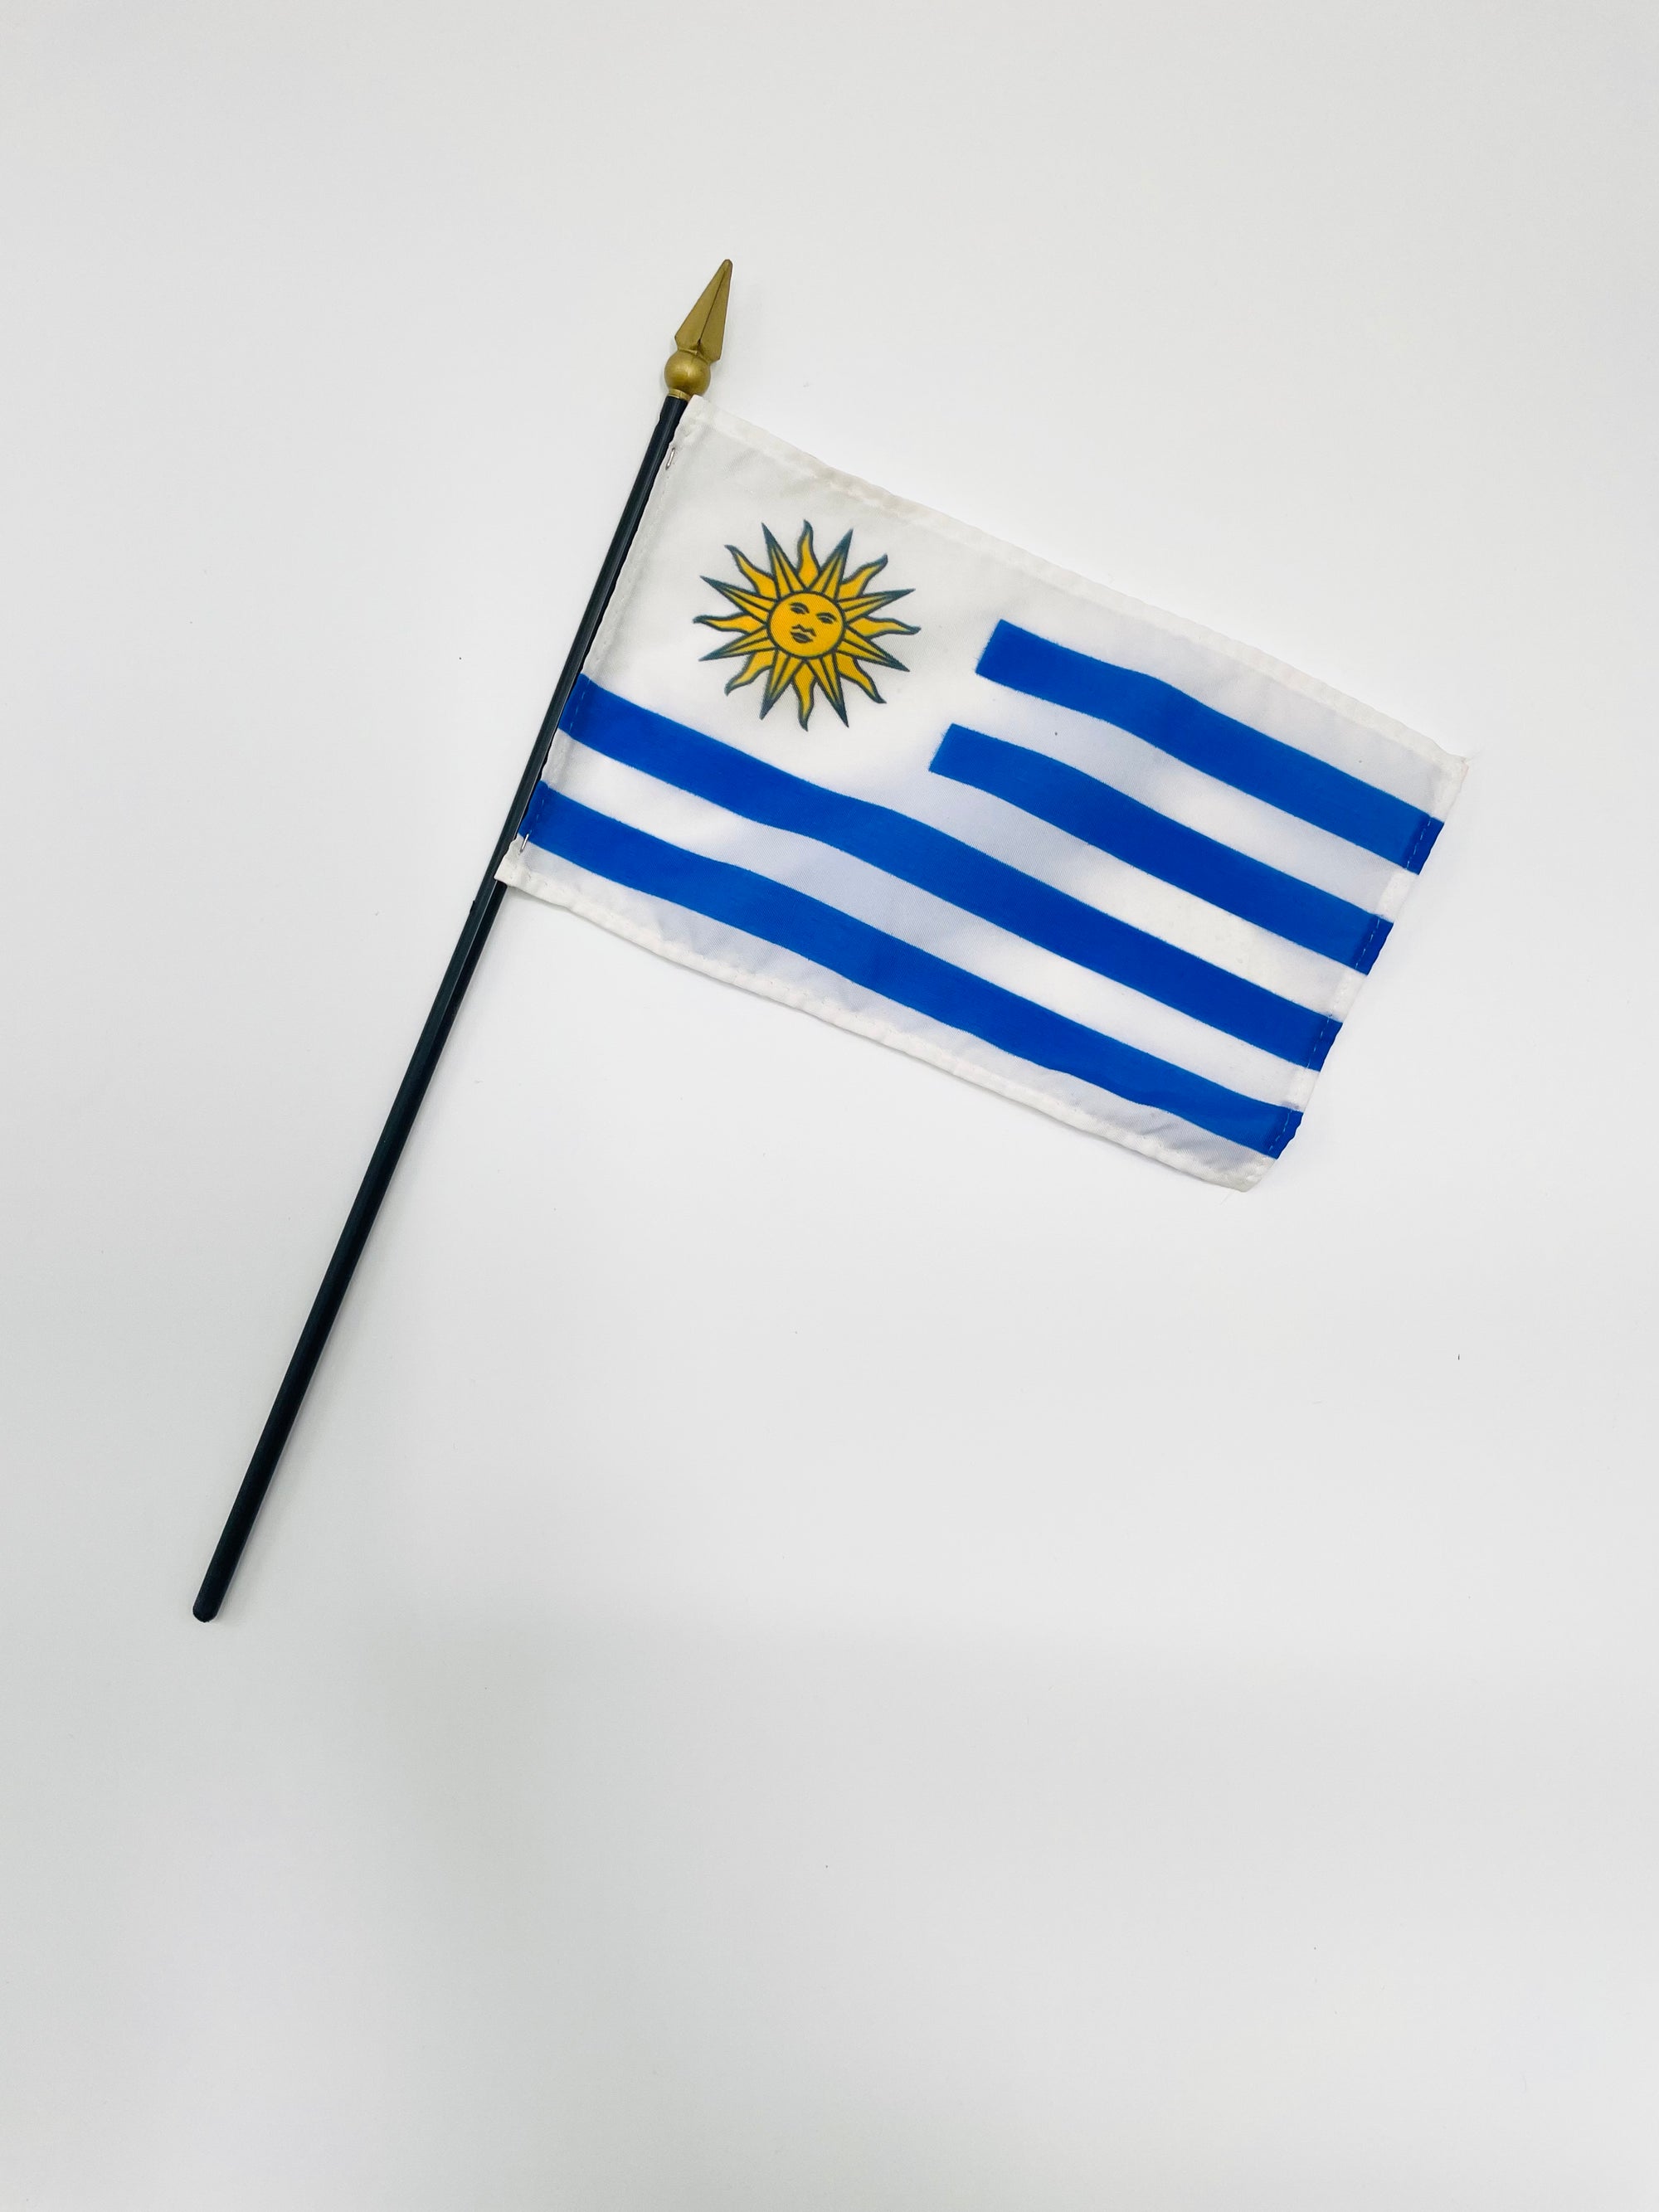 Uruguay 4in x 6in Mounted Handheld Stick Flags